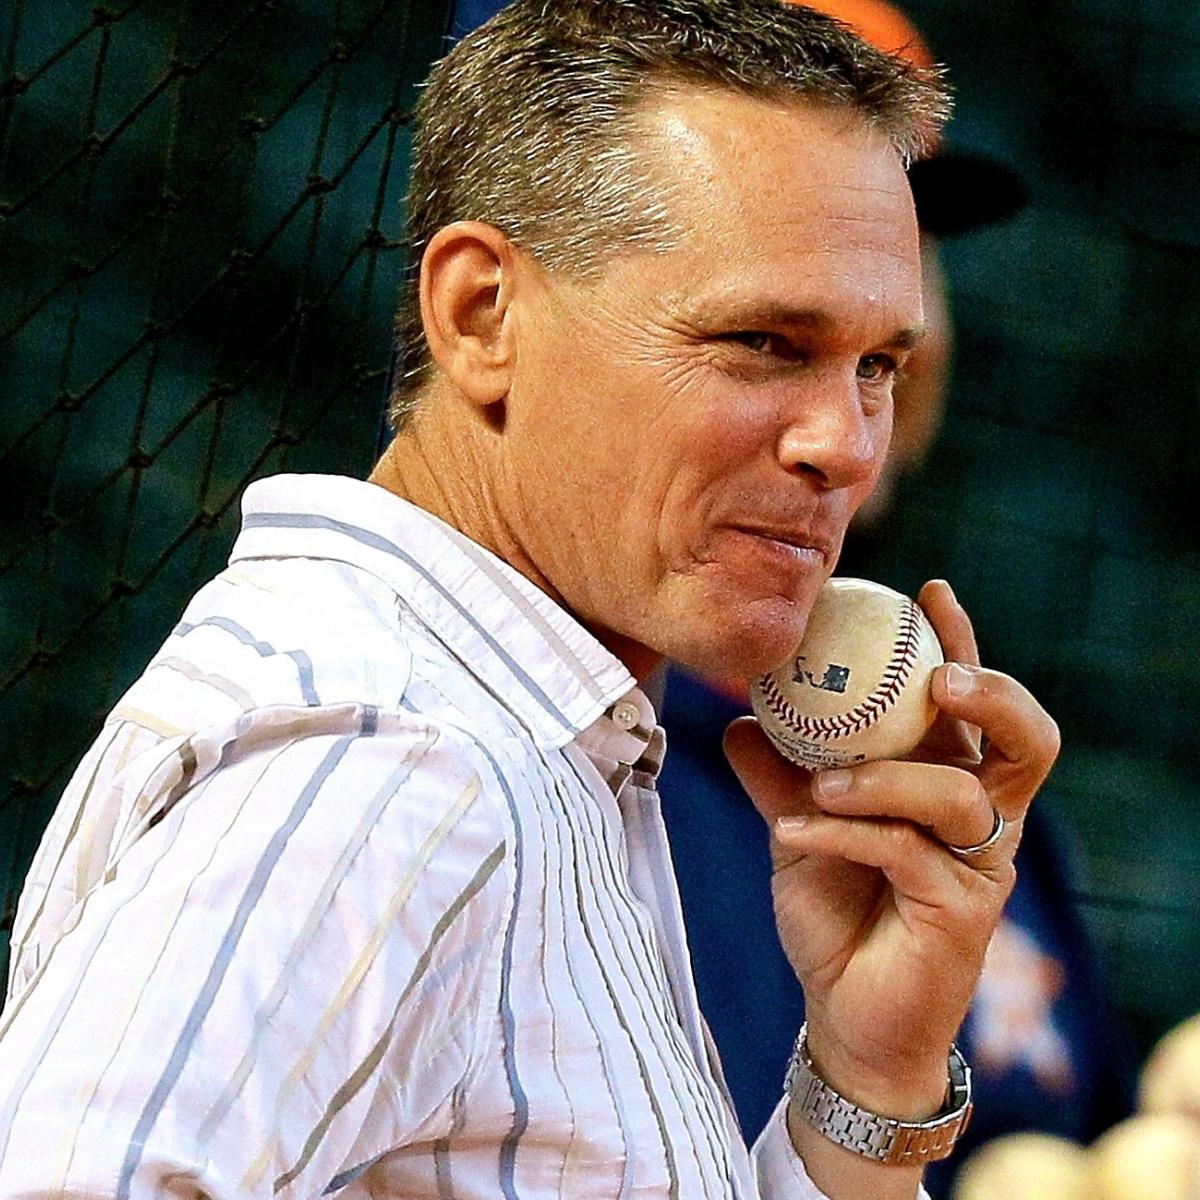 SI Vault: Craig Biggio's path to Cooperstown began at second base